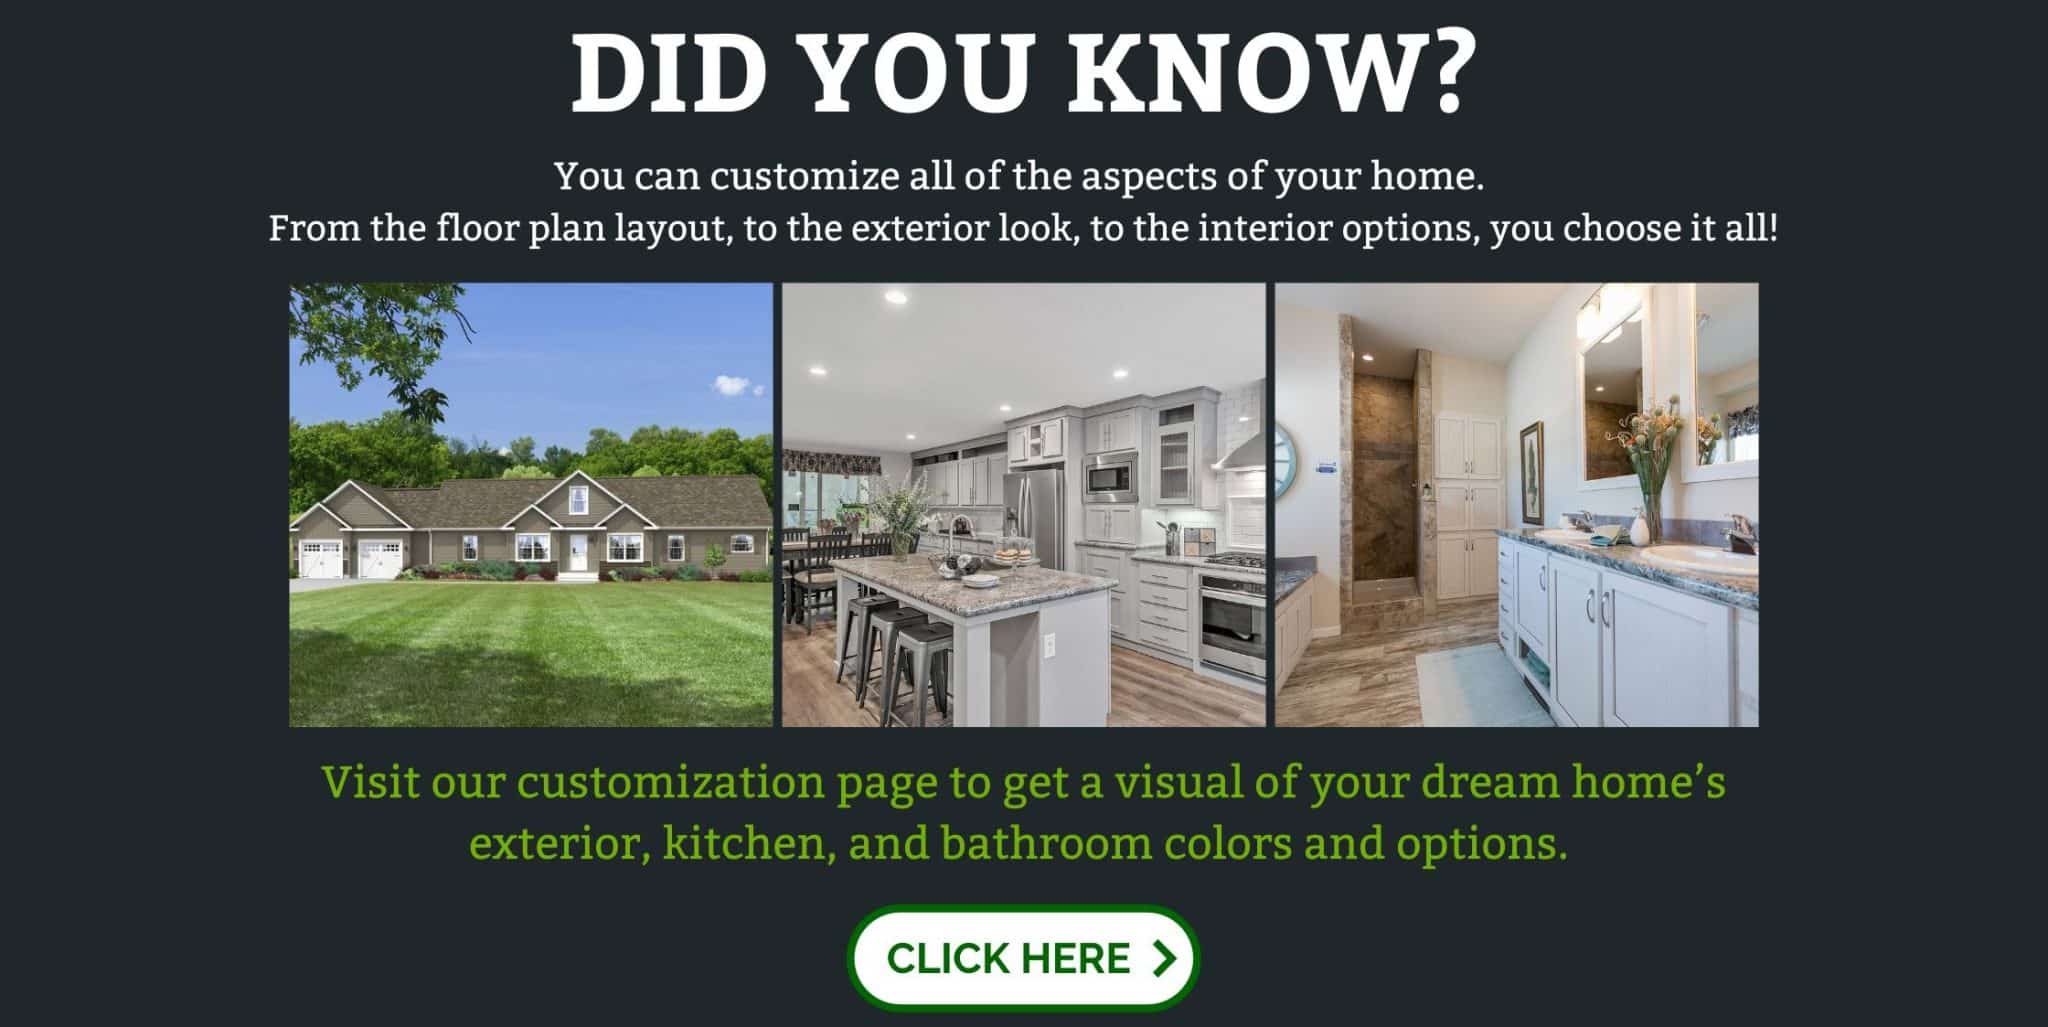 Did you know you can customize your new home?